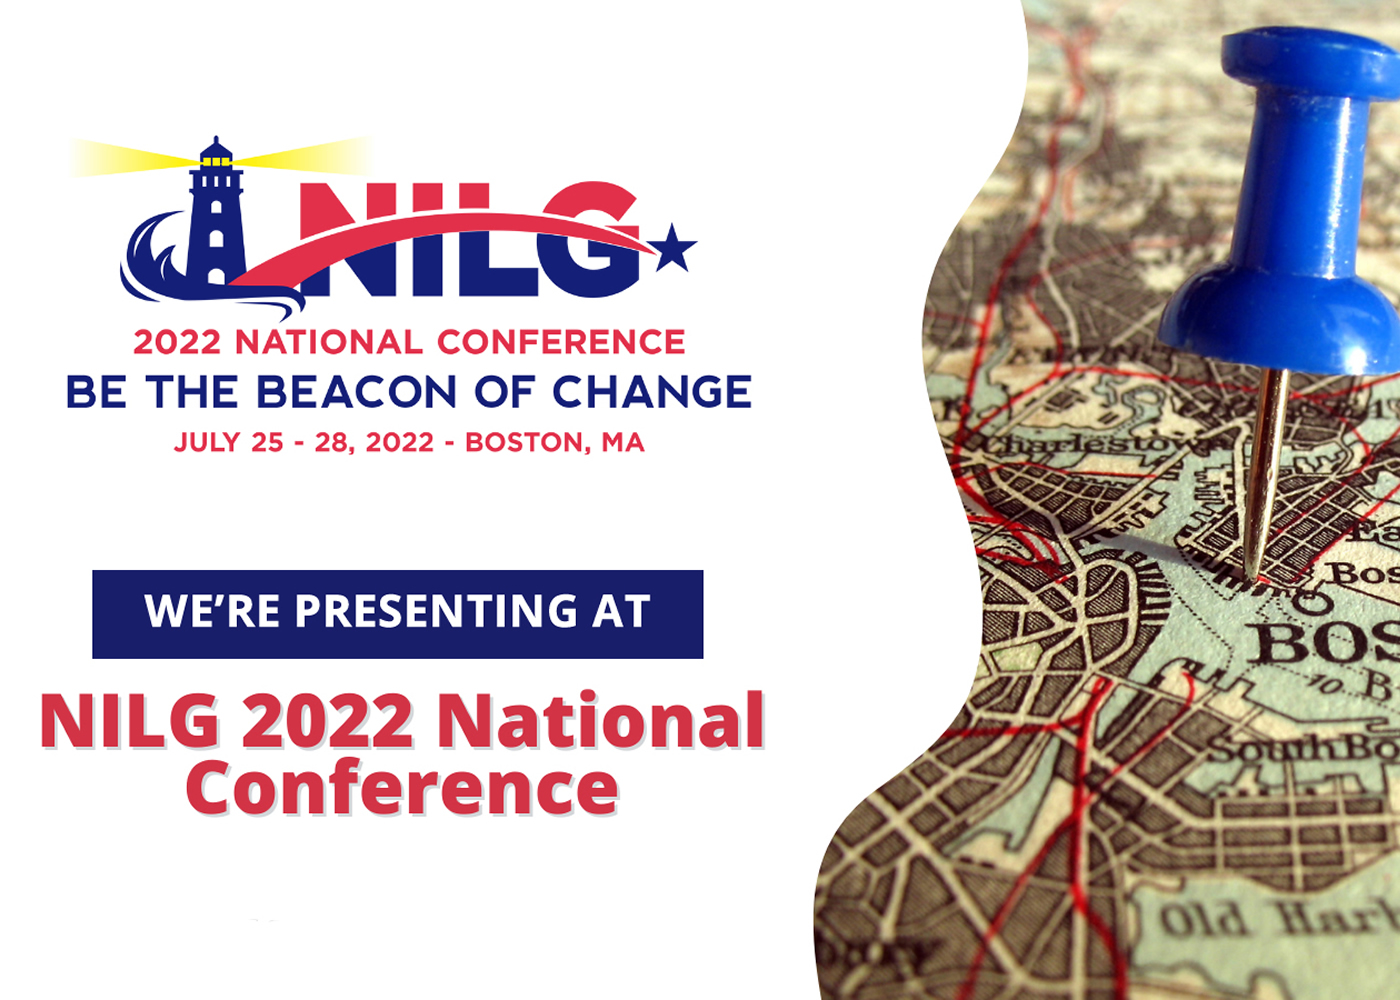 NILG 2022 National Conference - Be The Beacon of Change